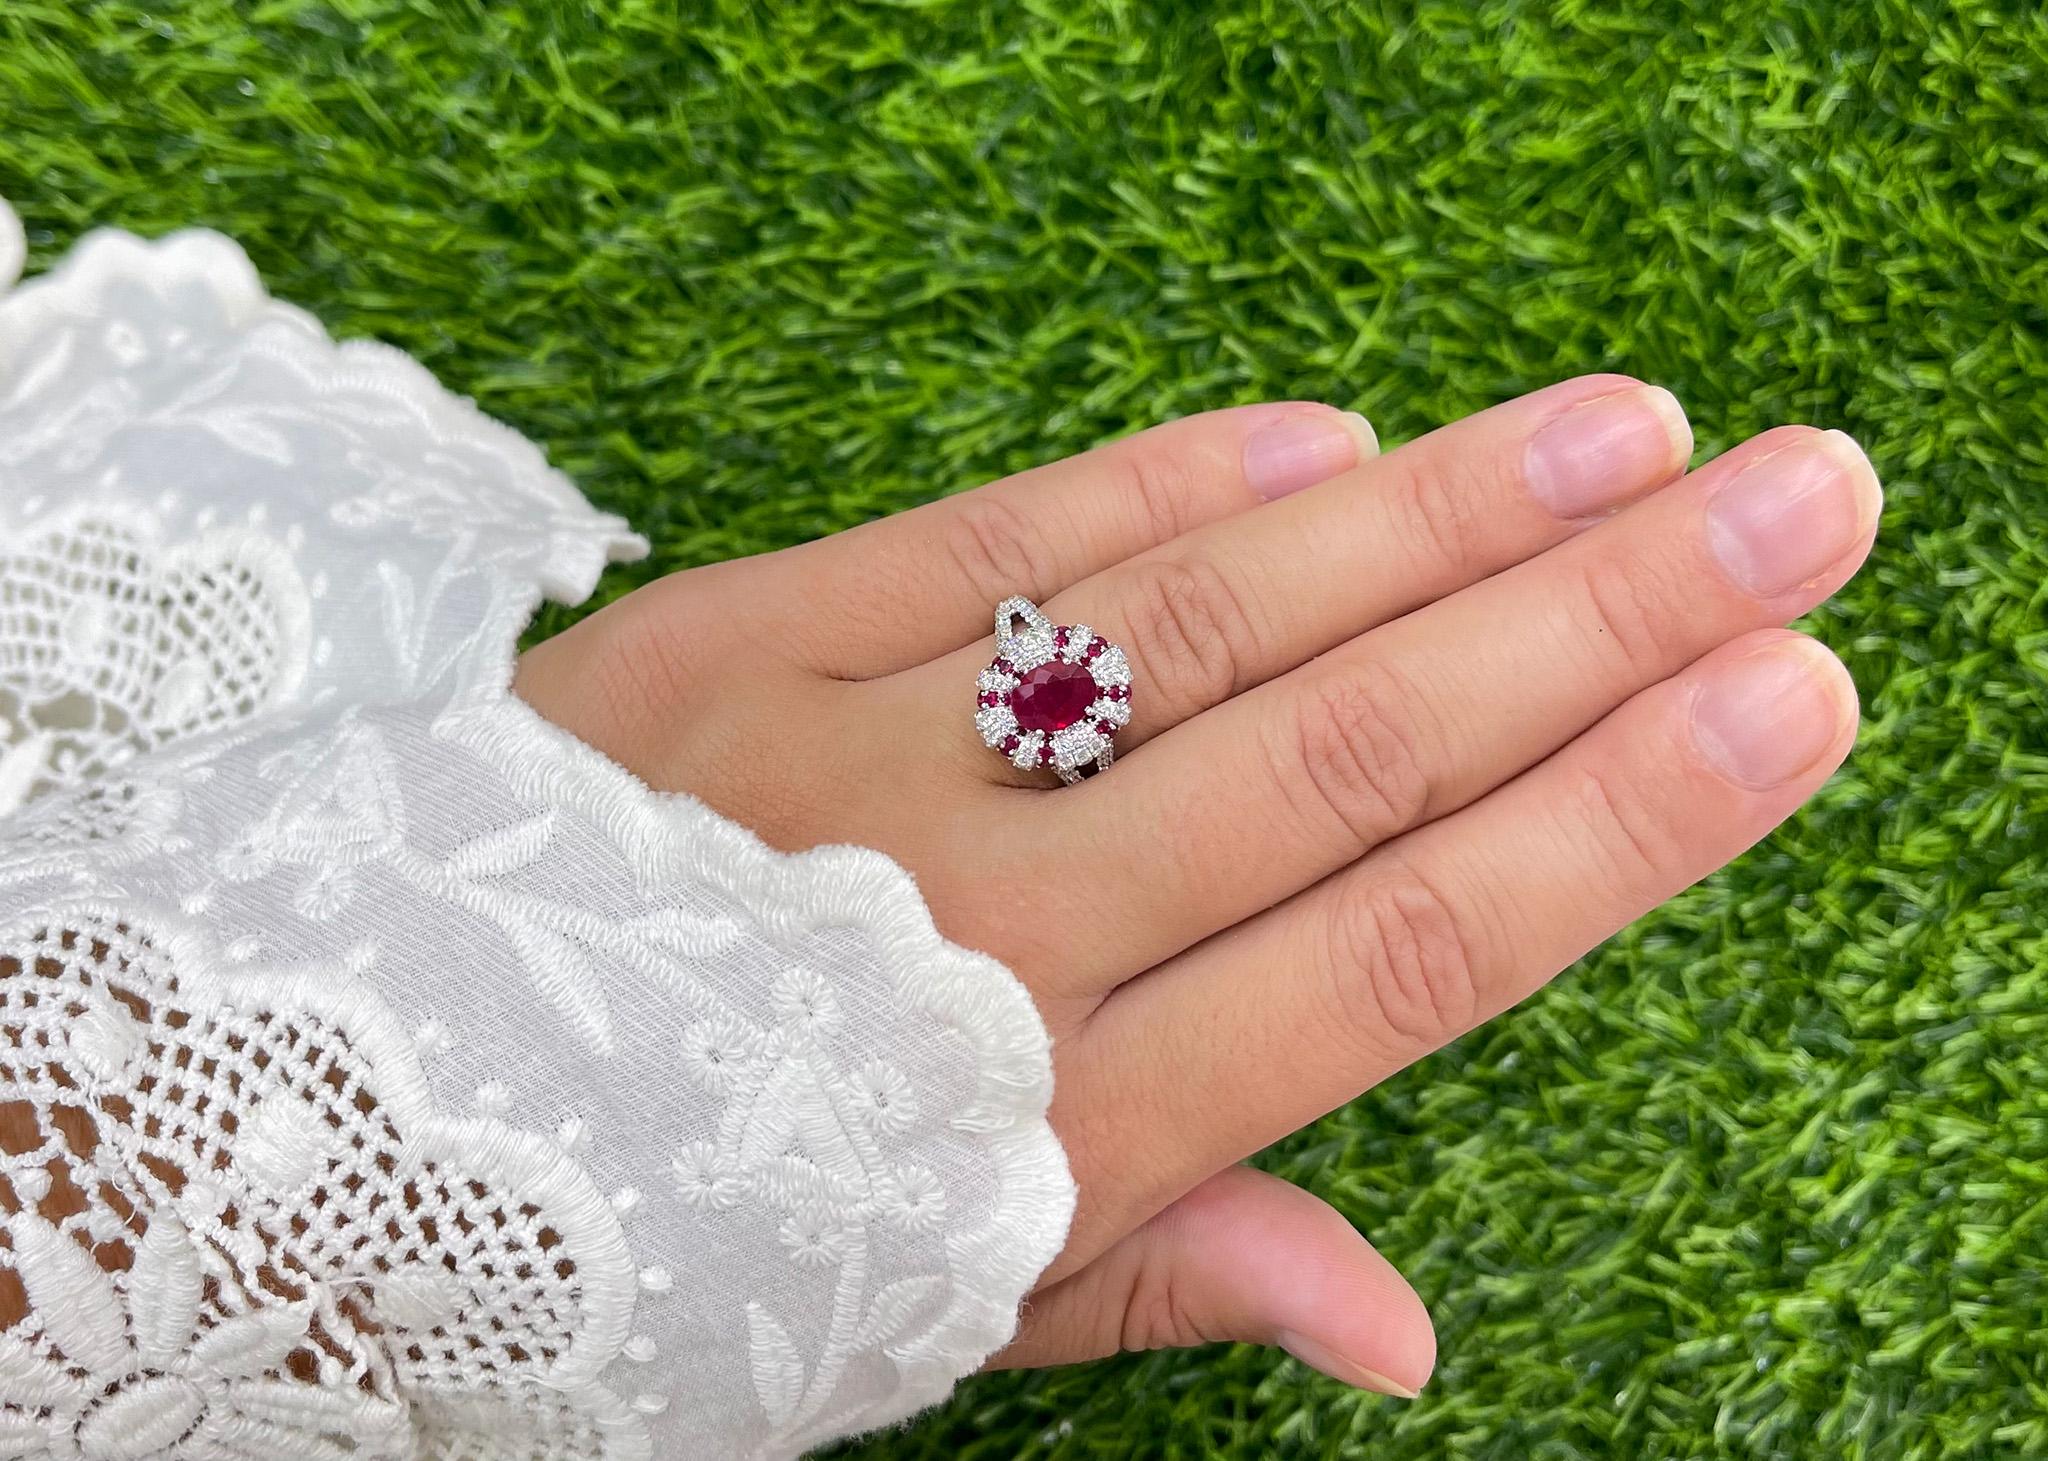 It comes with an appraisal by GIA G.G.
Total Carat Weight of Rubies = 2.04 Carats
Total Carat Weight of Diamonds = 0.92 Carats
Diamonds Color is F-G
Diamonds Clarity is VVS-VS
Metal is 18K White Gold
Ring Size = 6 US
It can be resized complimentary 